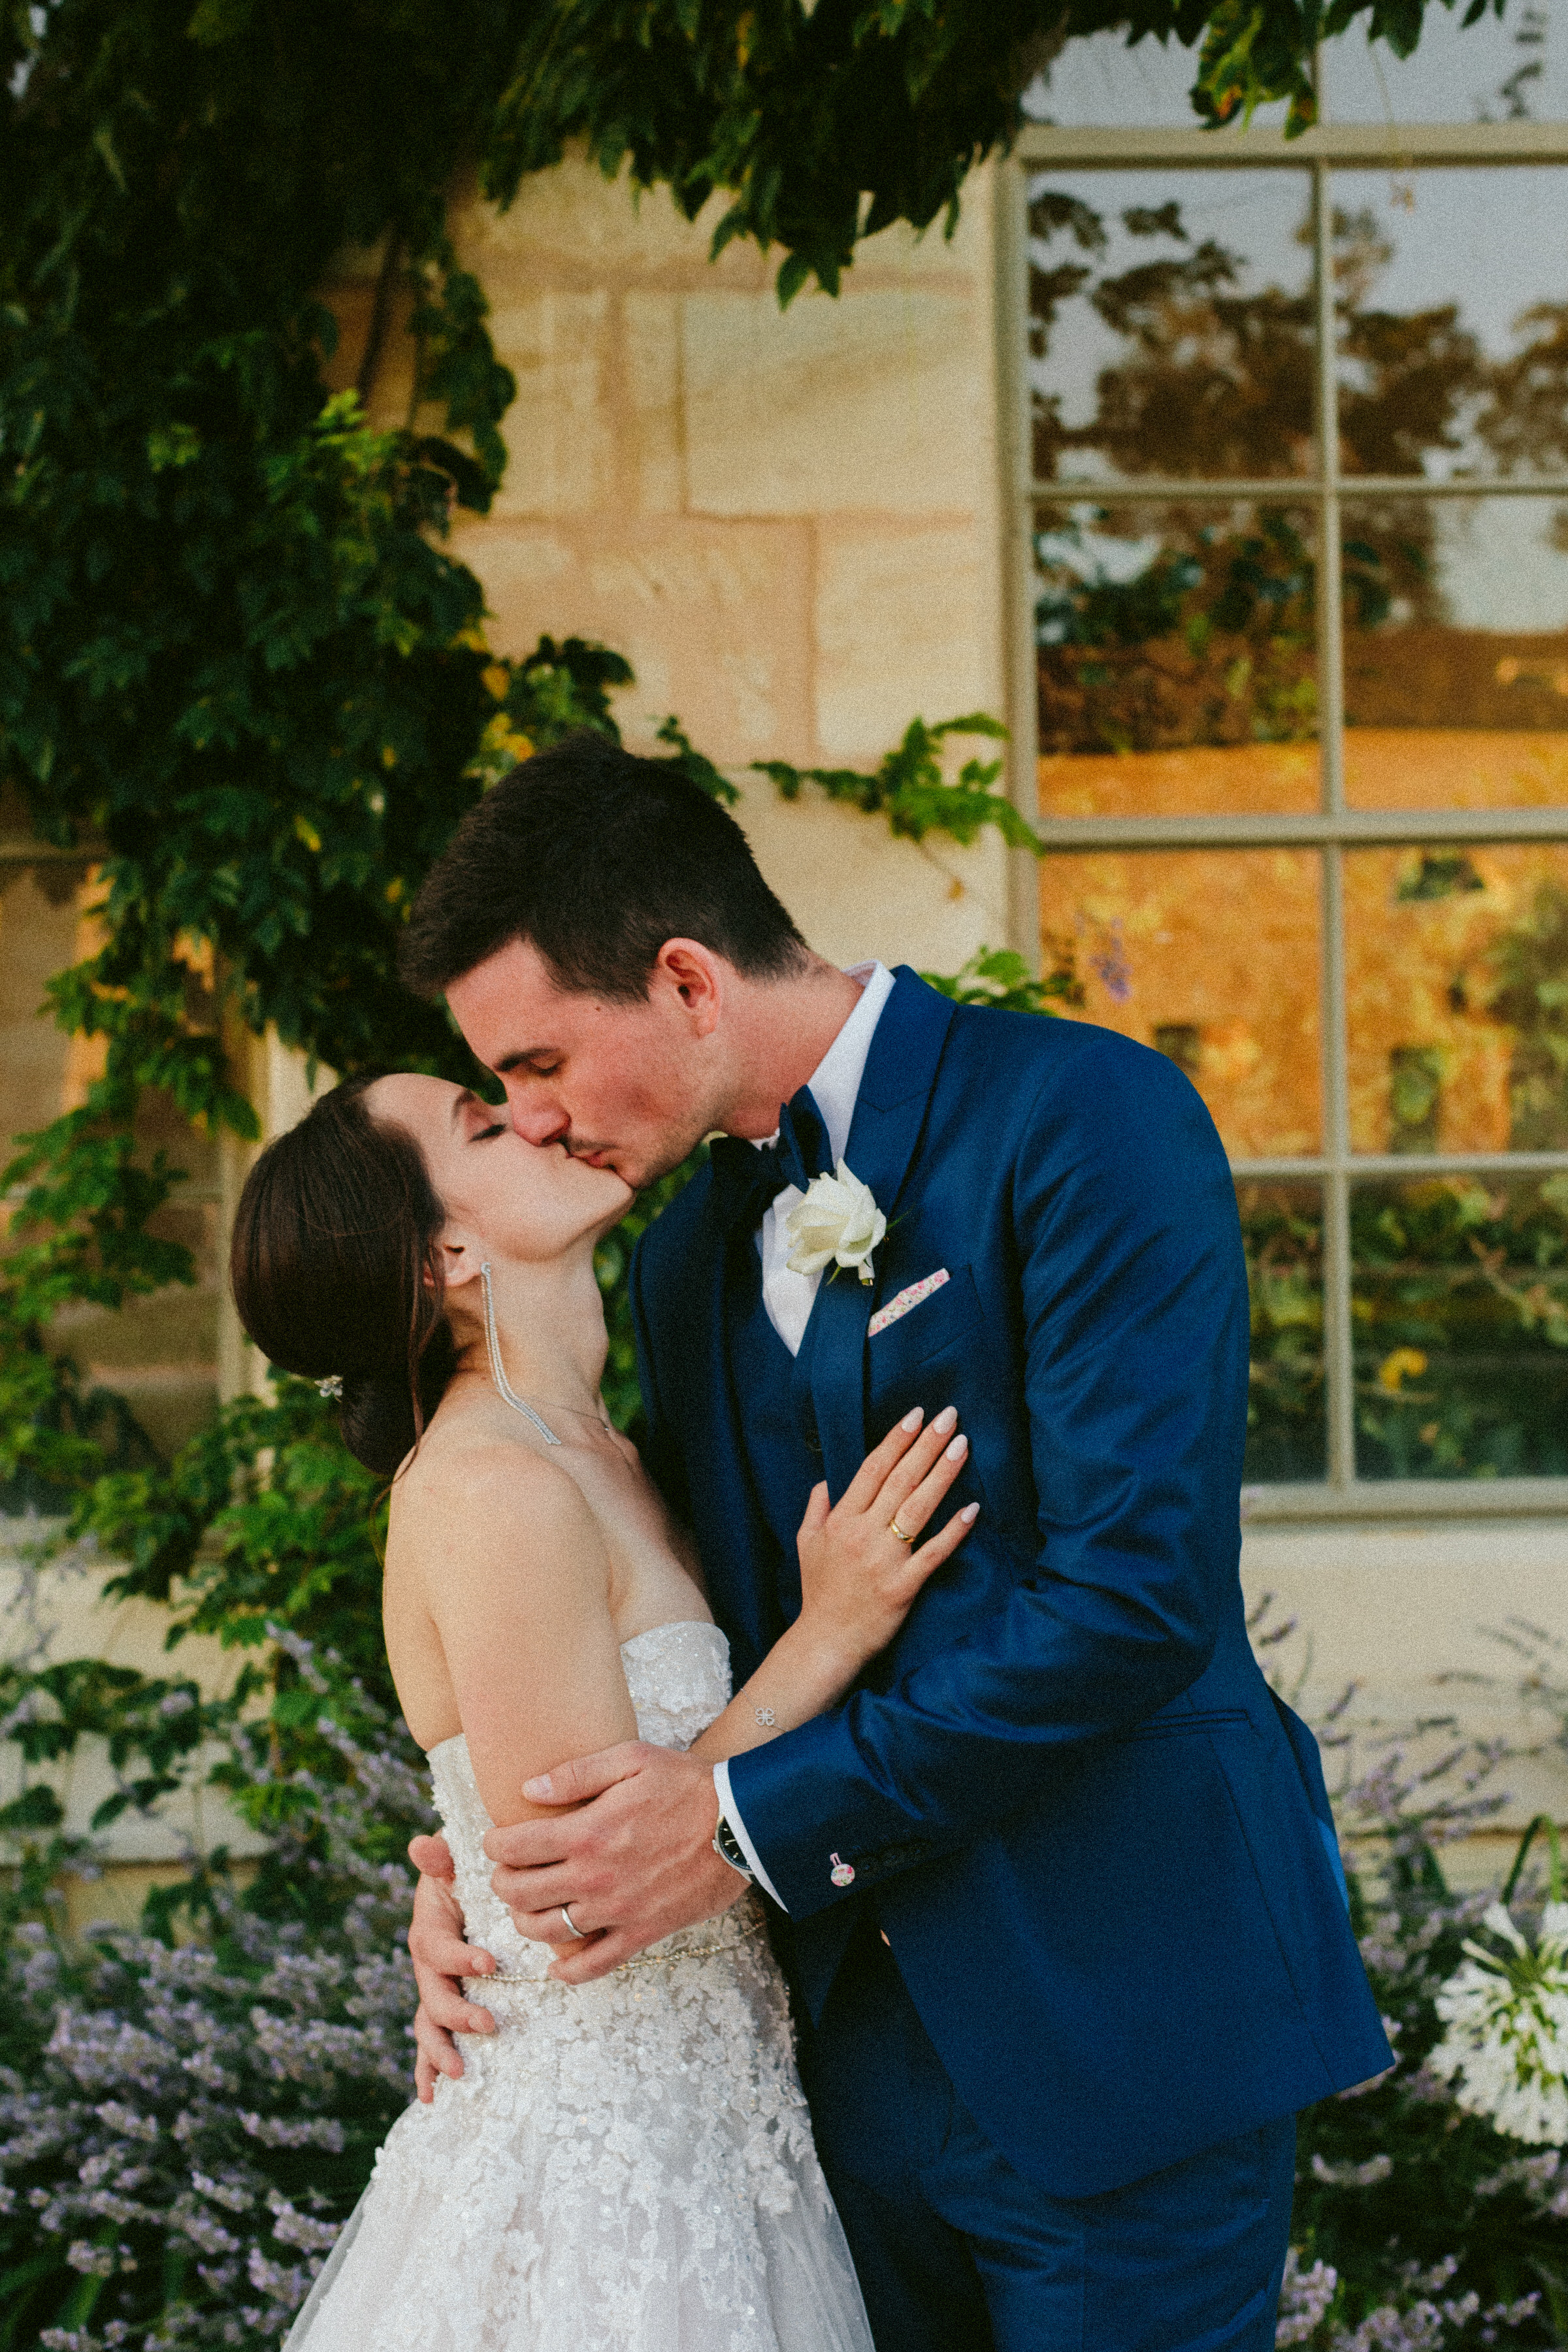 Bride and groom portrait kissing Classy french wedding